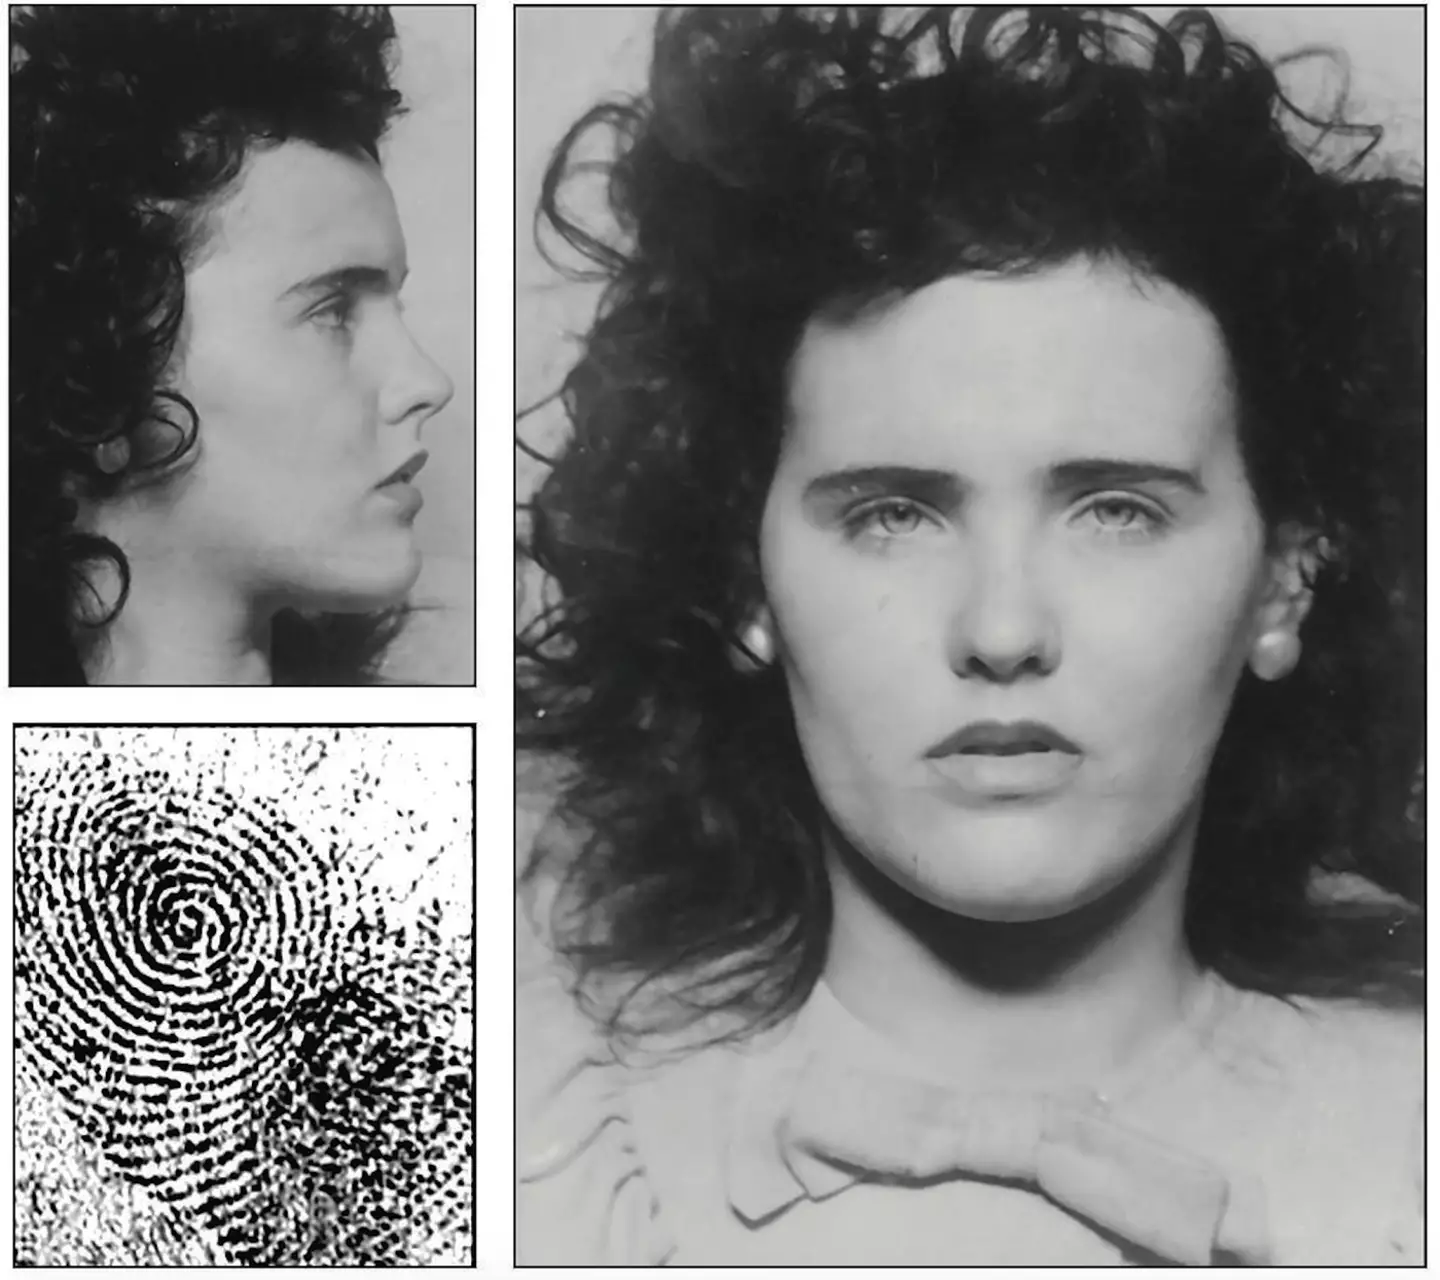 There are claims that Del Rey was posing as the Black Dahlia in the music video.